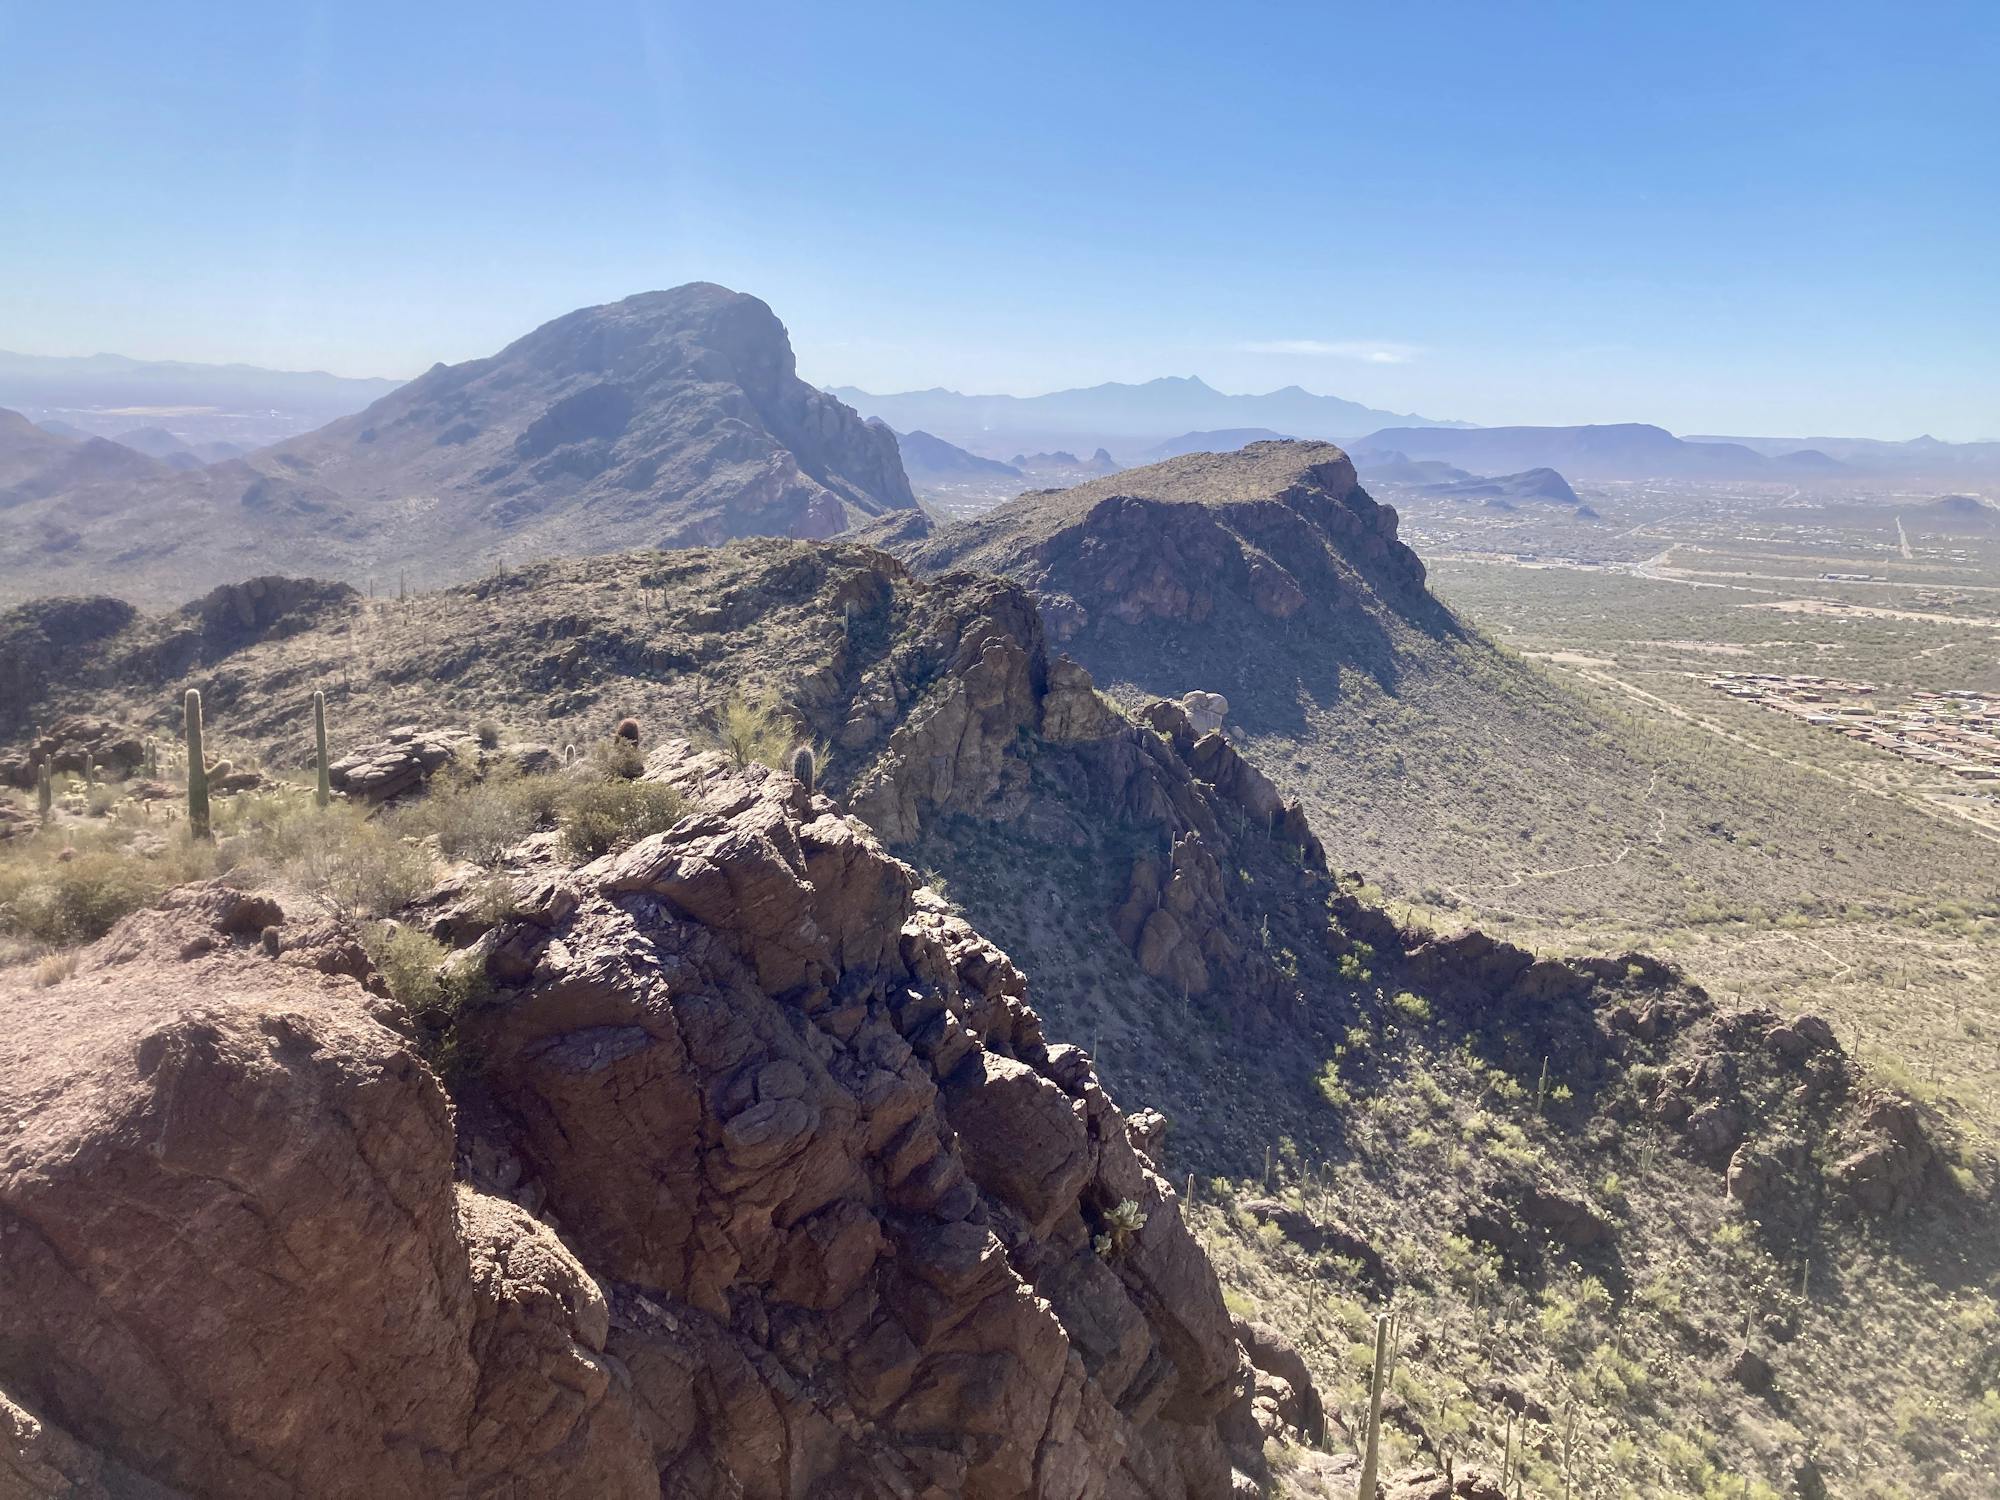 View of the ridge and the Tucson Mountains